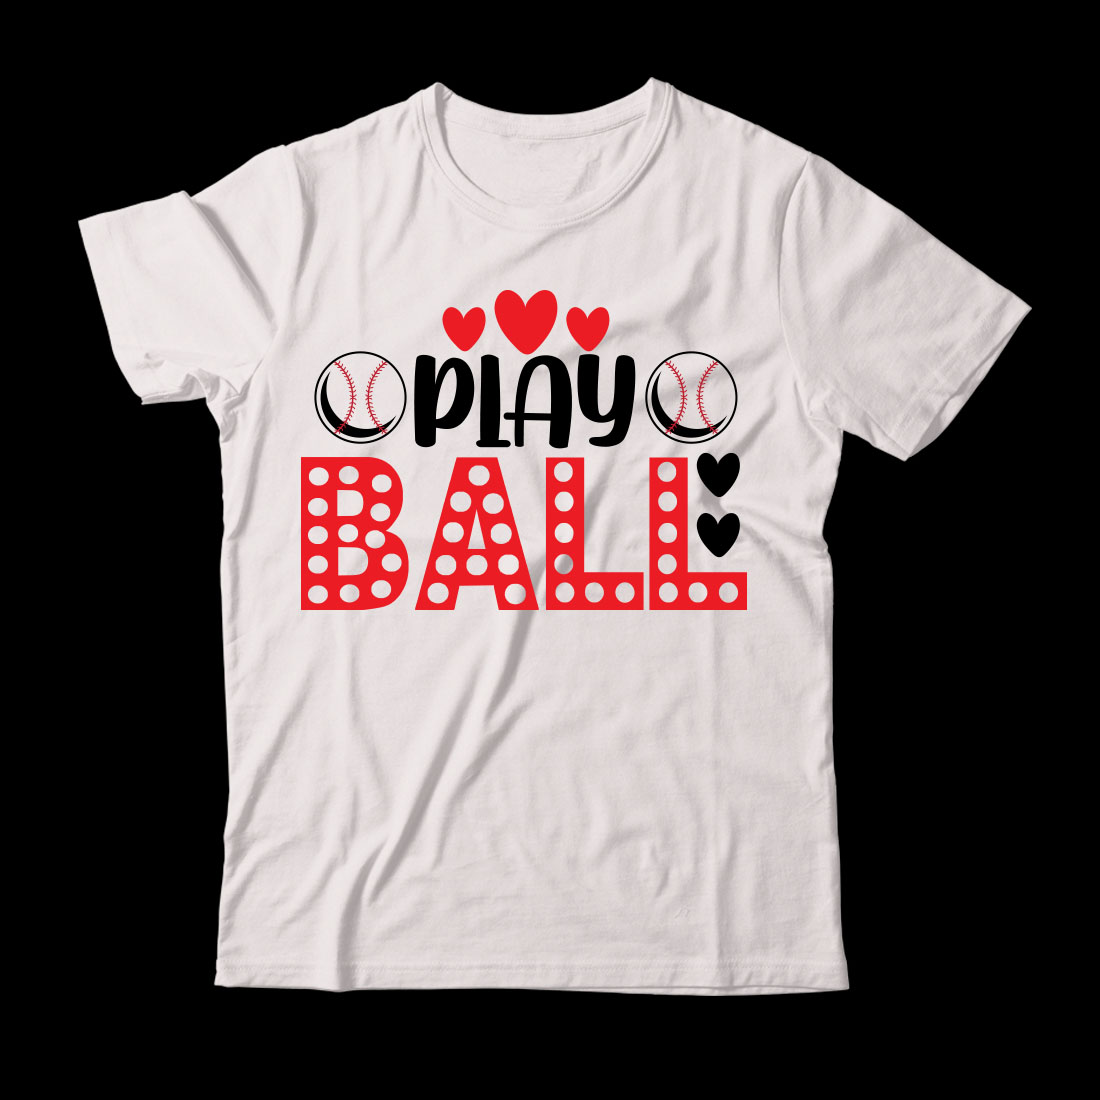 White t - shirt with the word play ball on it.